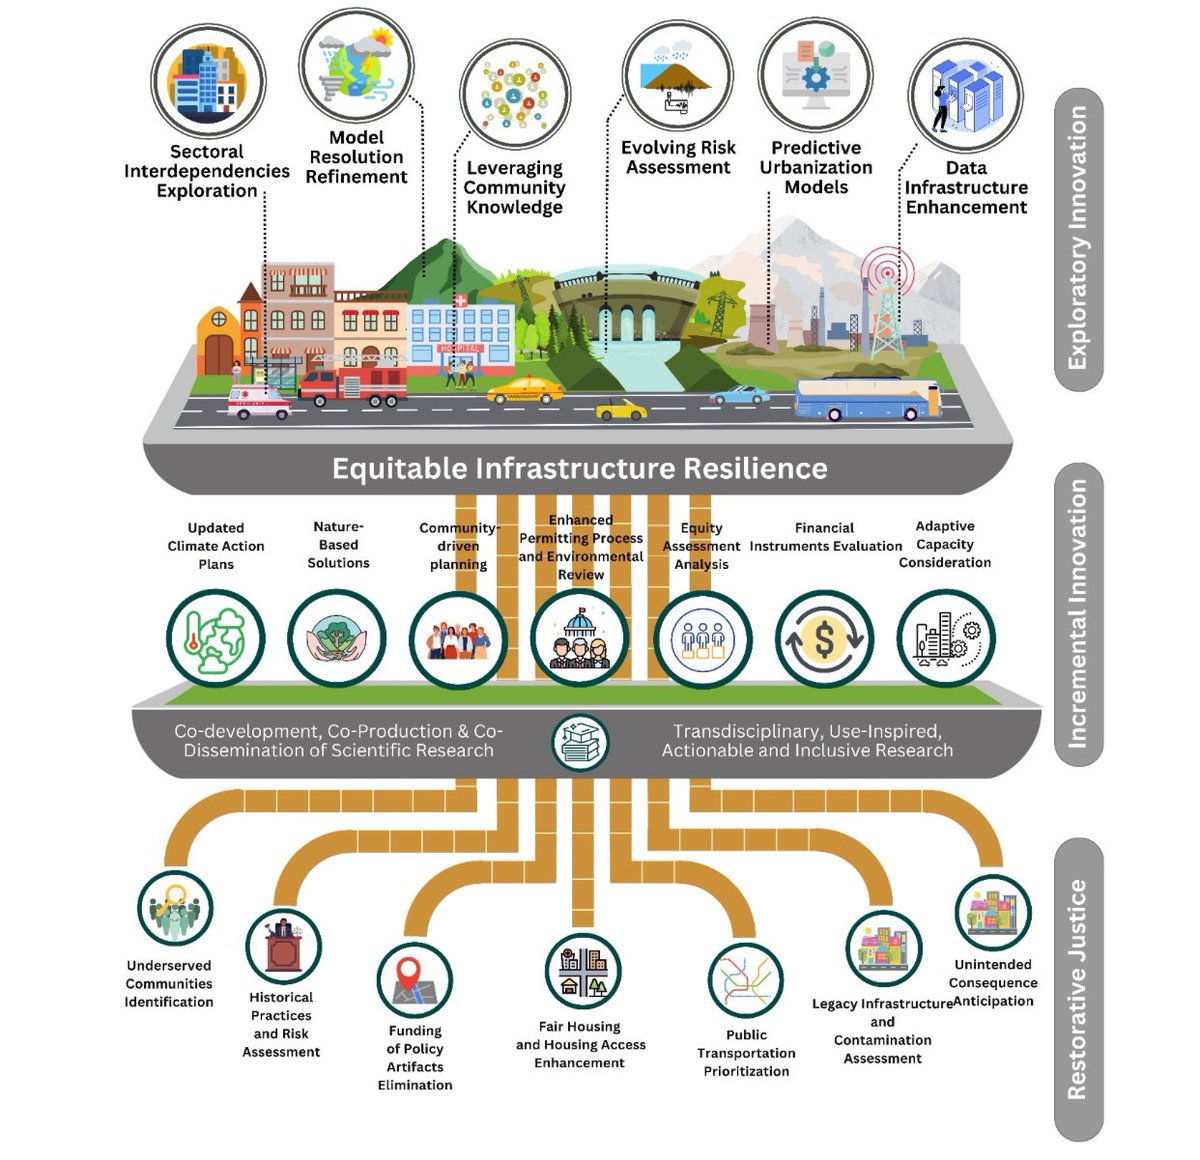 A new paper by our scientists presents a three-pronged approach to equitable and resilient infrastructure by: 1) prioritizing #equity in infrastructure decision-making 2) disrupting mechanisms that cause inequities 3) addressing historic harms 👉 academic.oup.com/pnasnexus/adva…